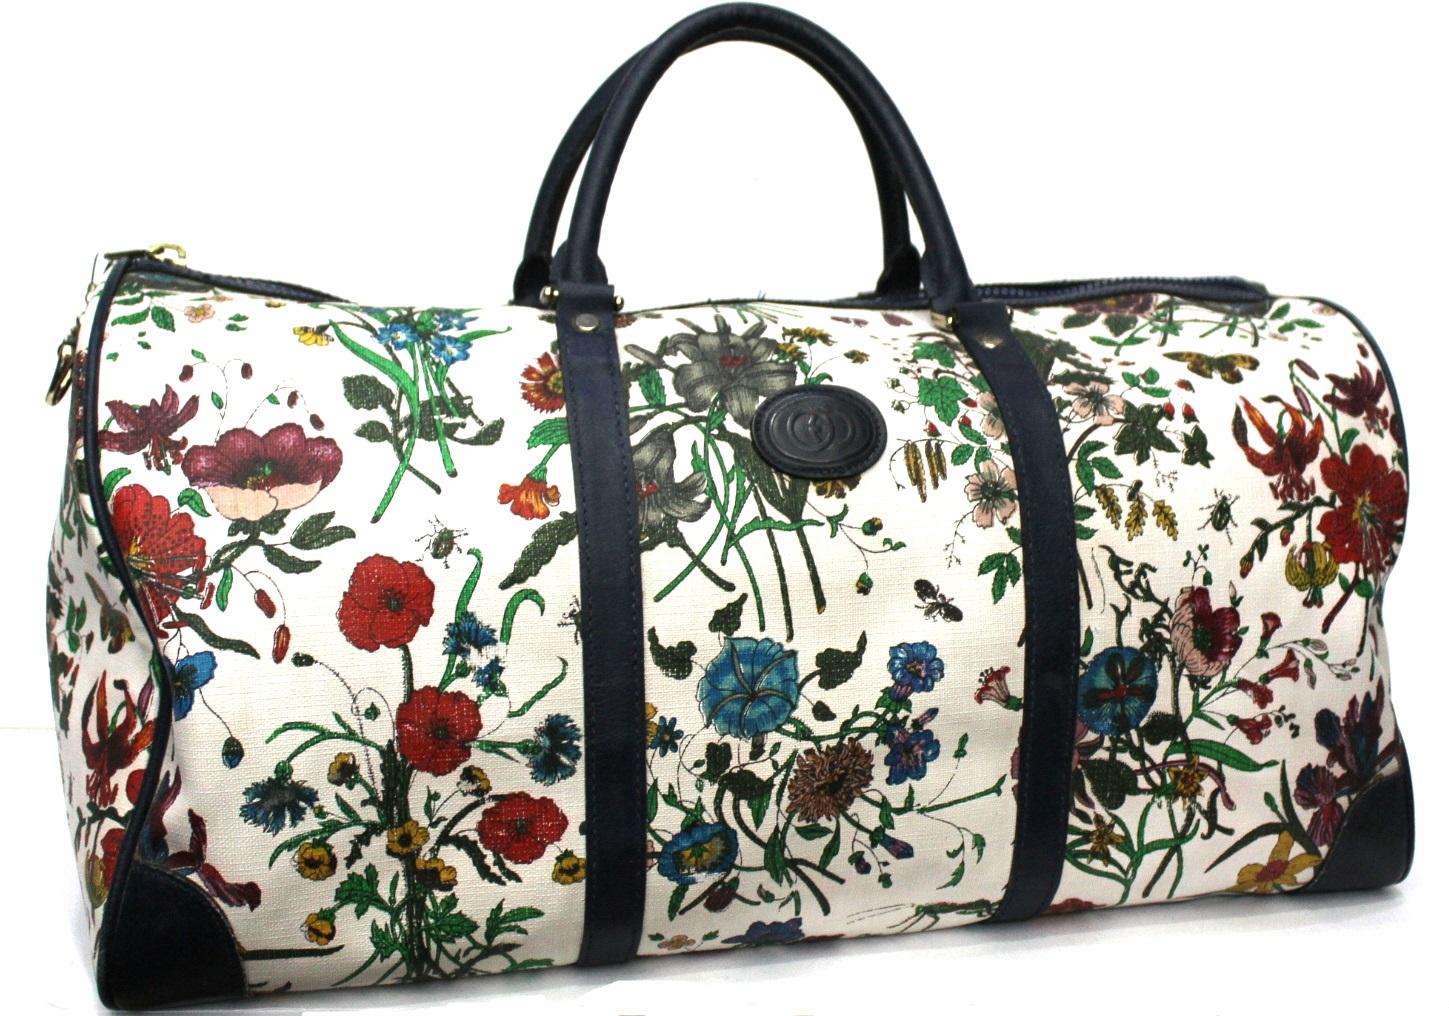 Duffel bag from the Gucci Flora line. Currently the Flora line has returned to the Gucci collections. Made of white canvas with flower print. Blue leather handles and details. Zip closure, very large inside. Missing shoulder strap.